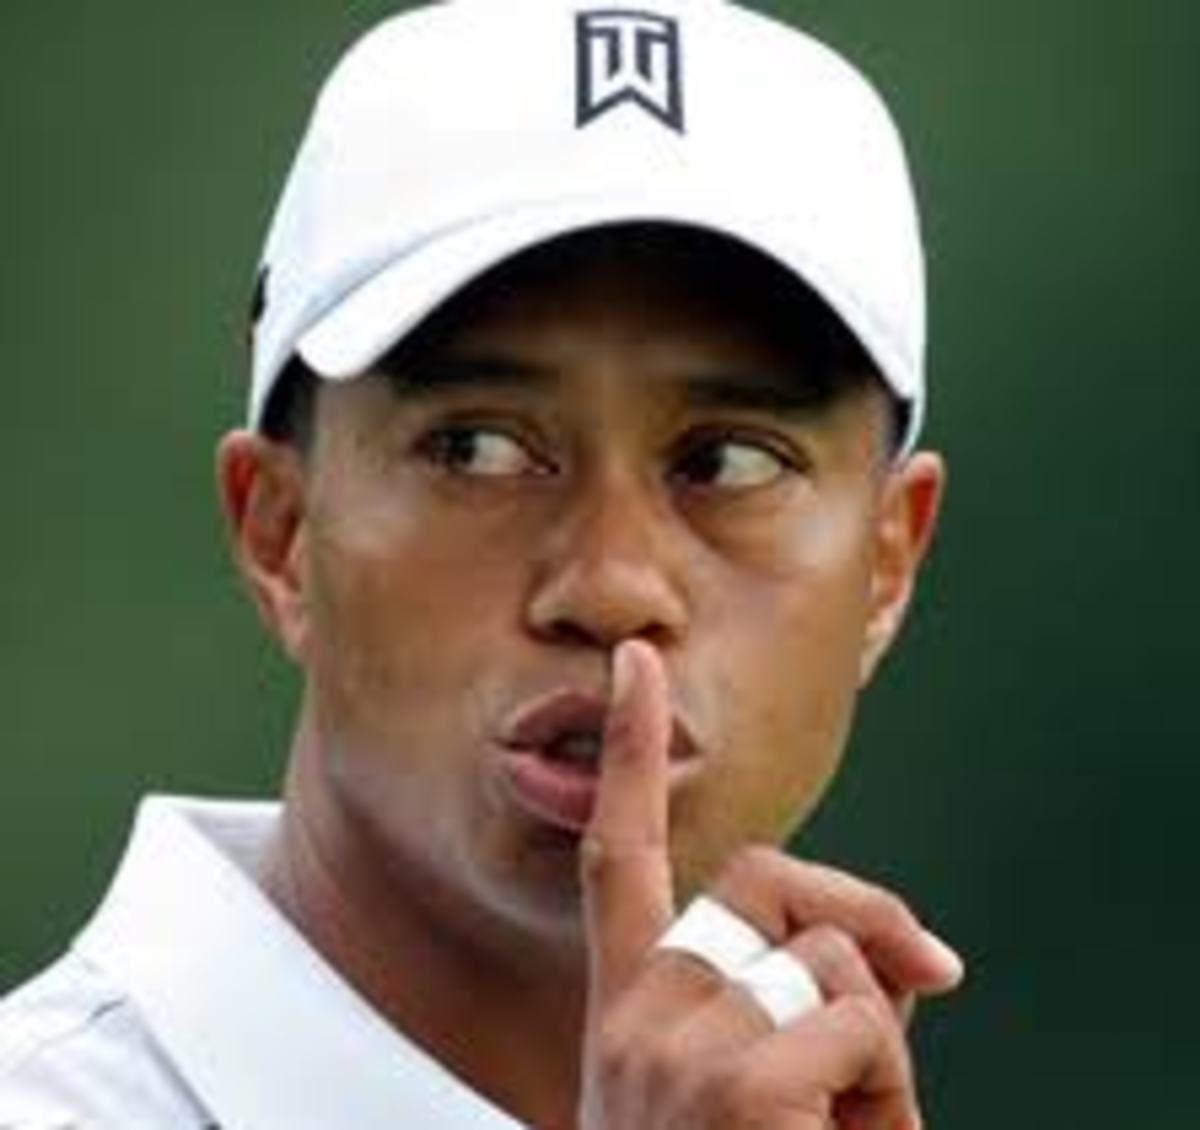 Tiger and the big-shots running the PGA anti-doping program are quiet about the whole thing.